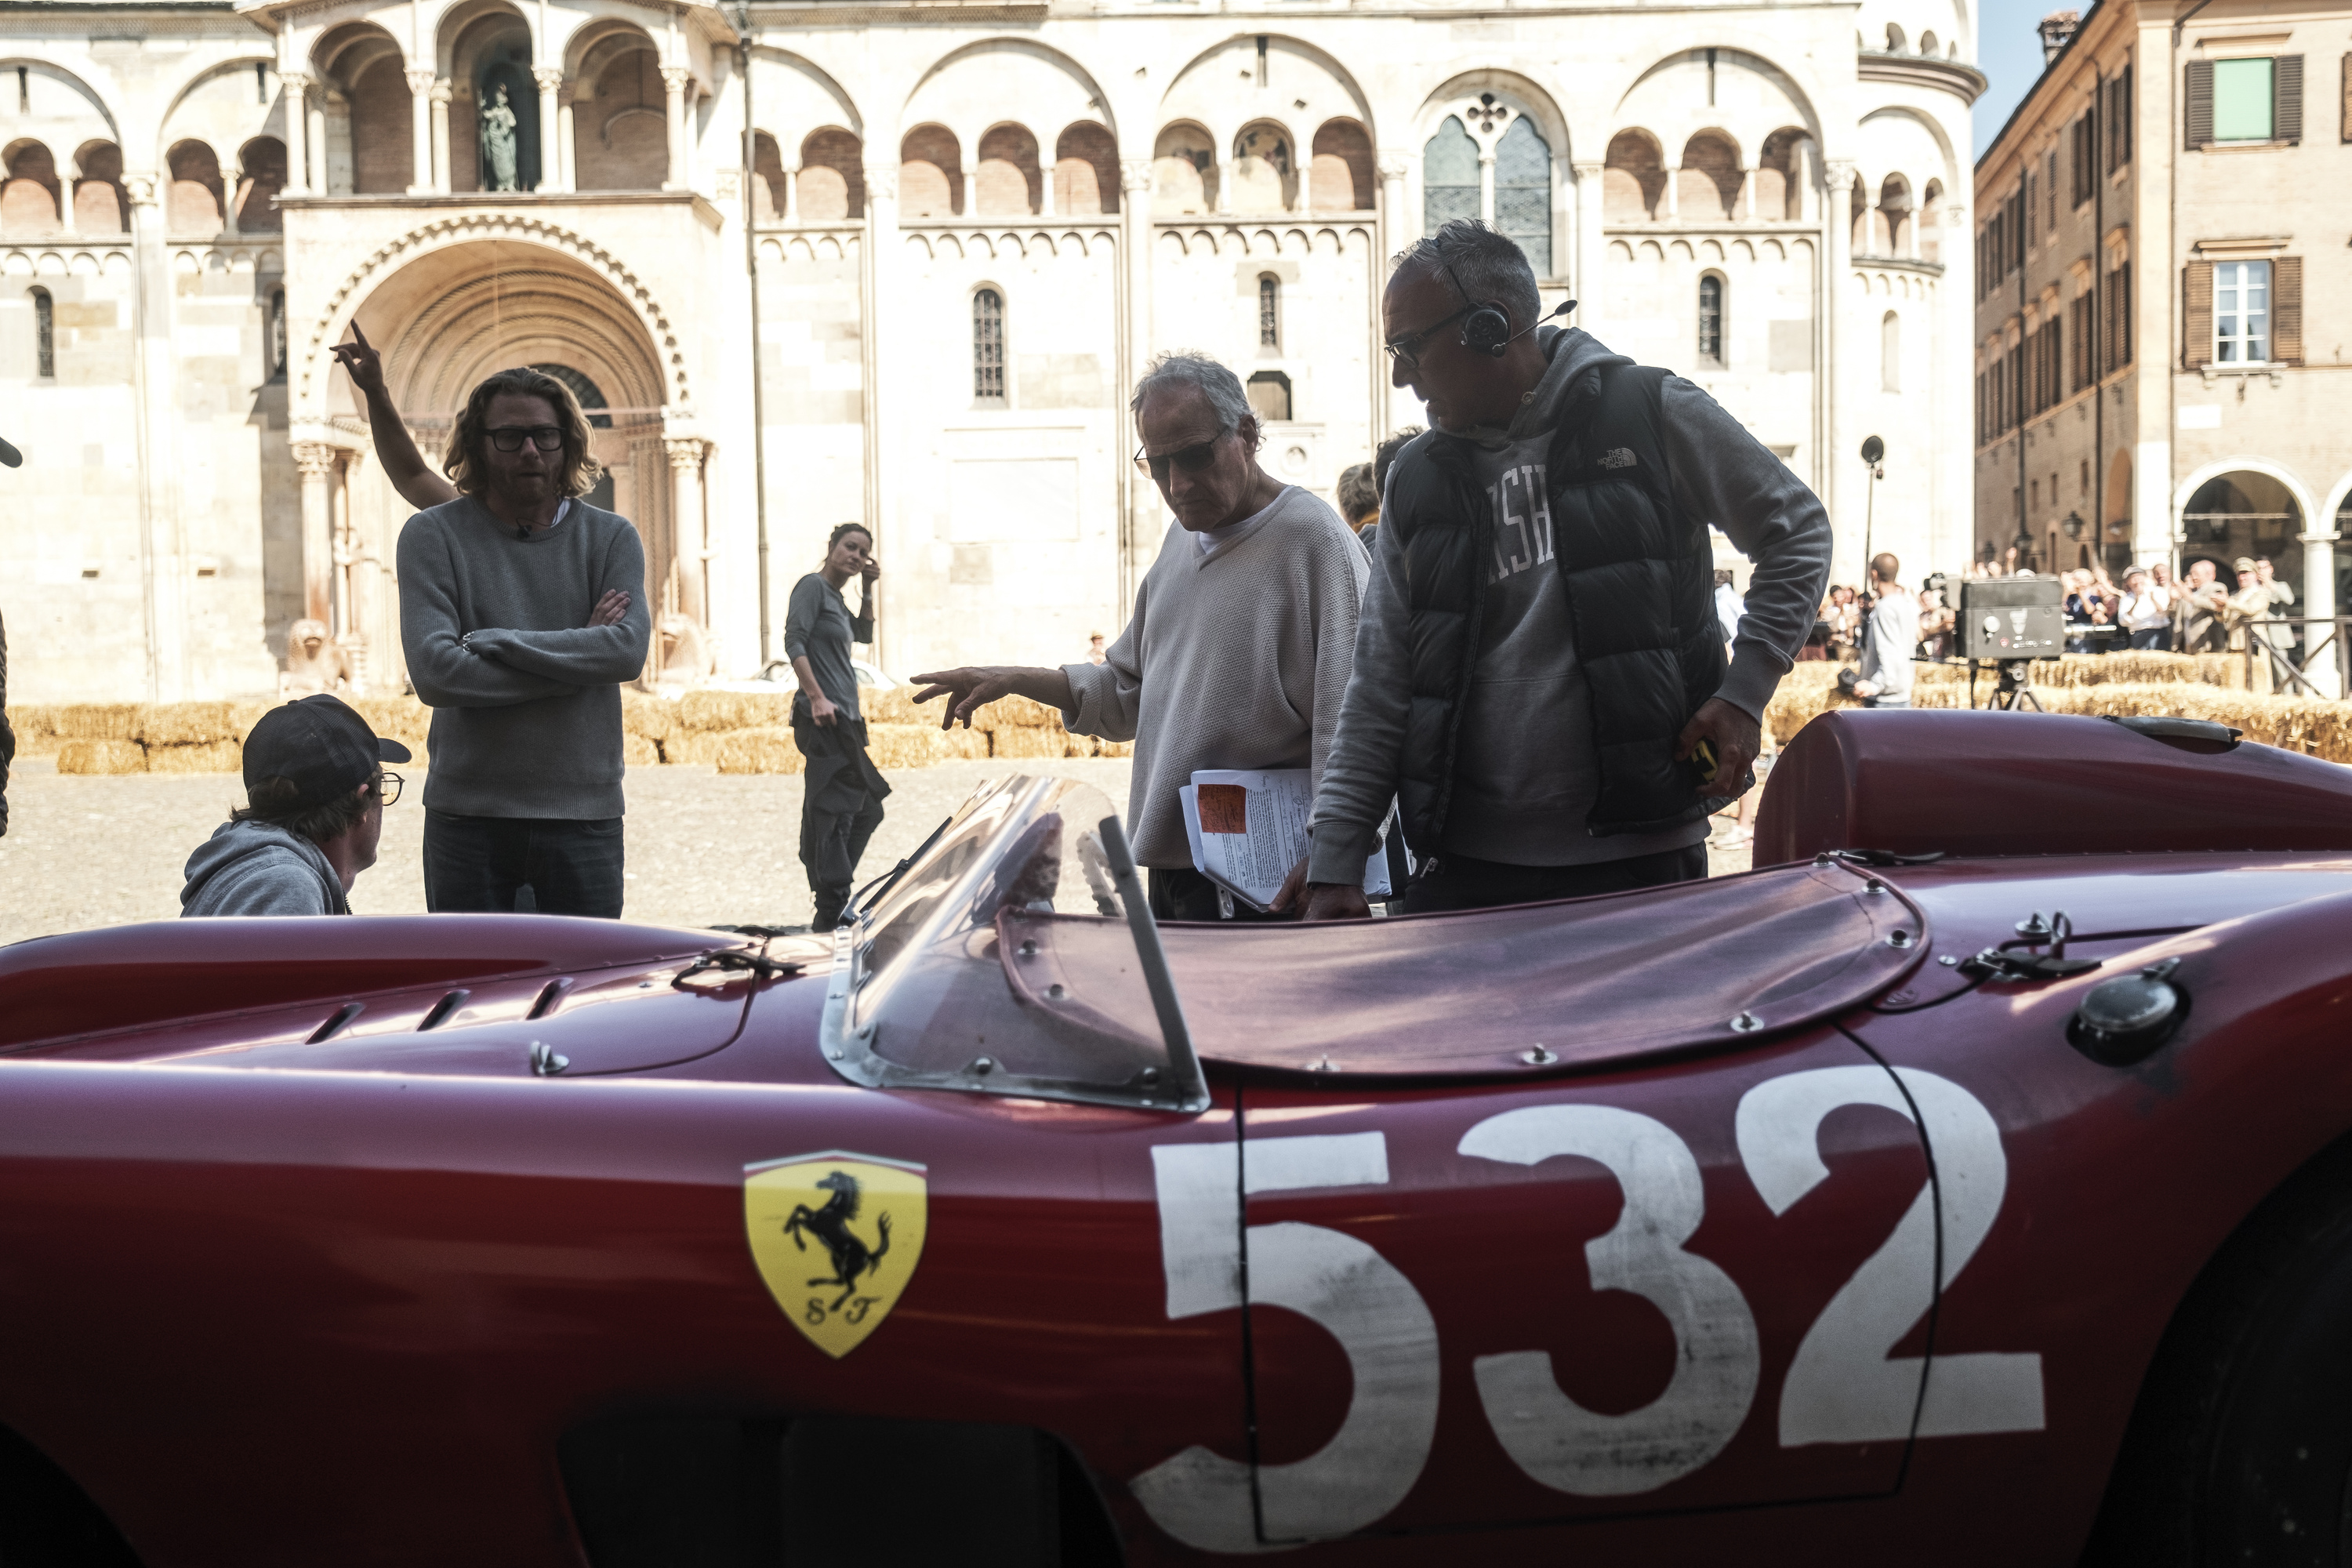 How They Made the Ferraris in the Movie Look Real